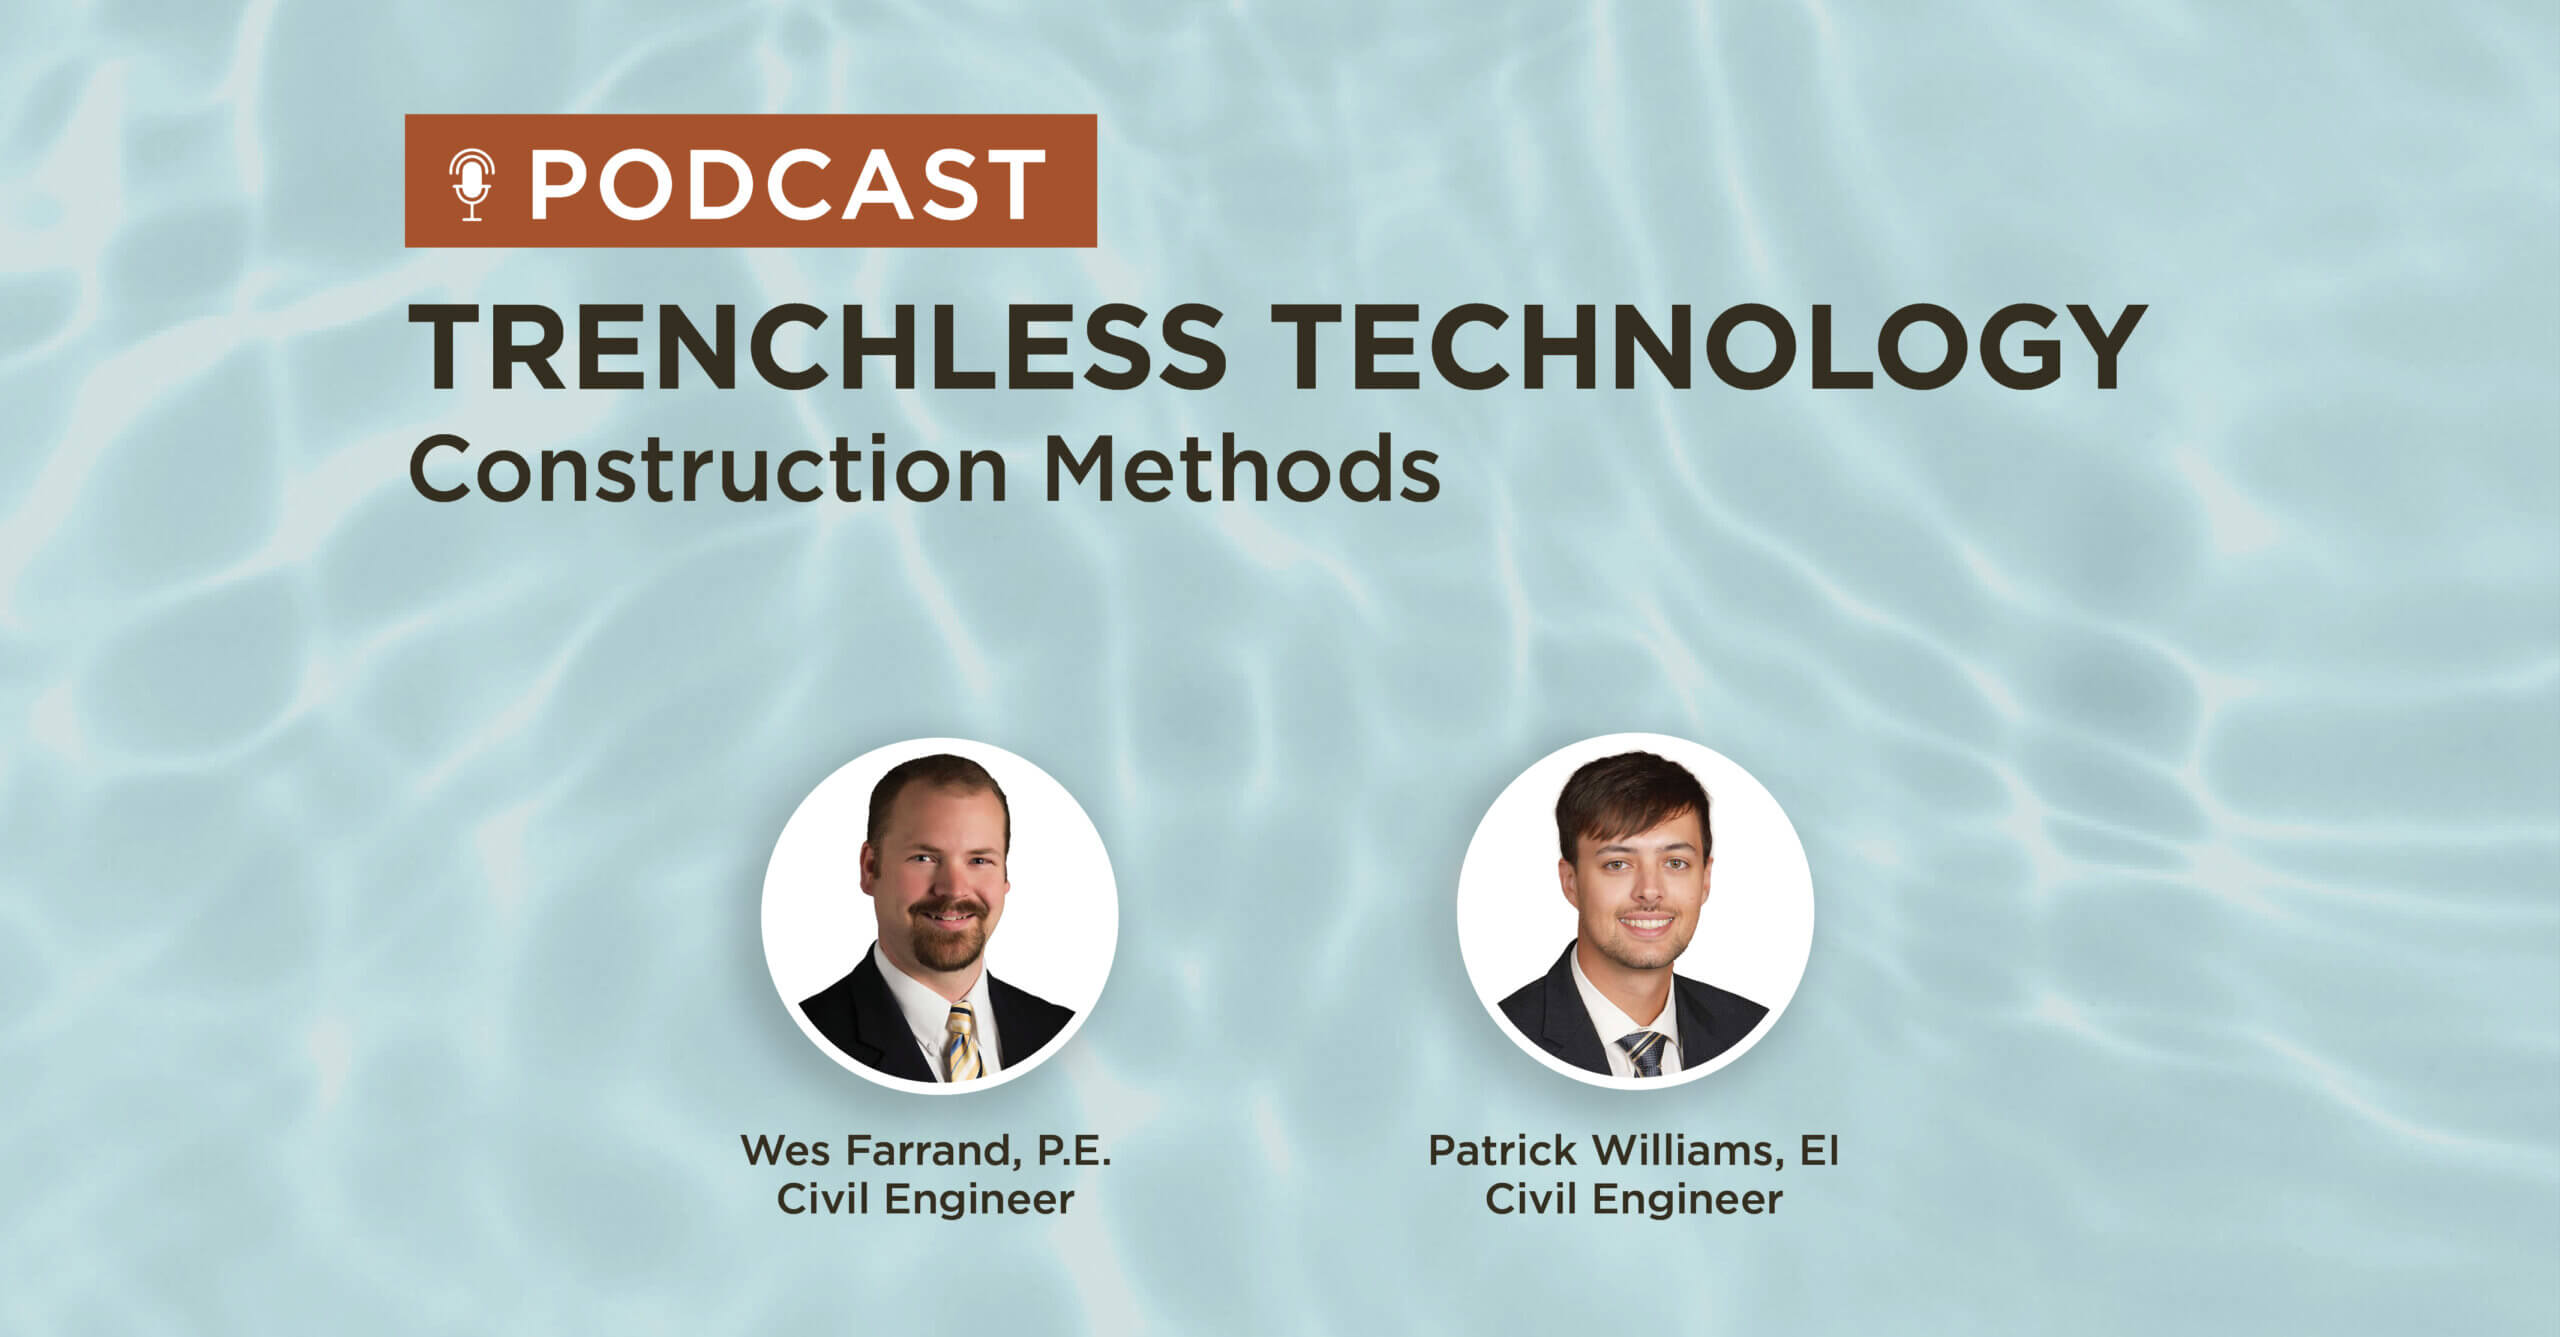 blue water background with title Trenchless technology construction methods podcast